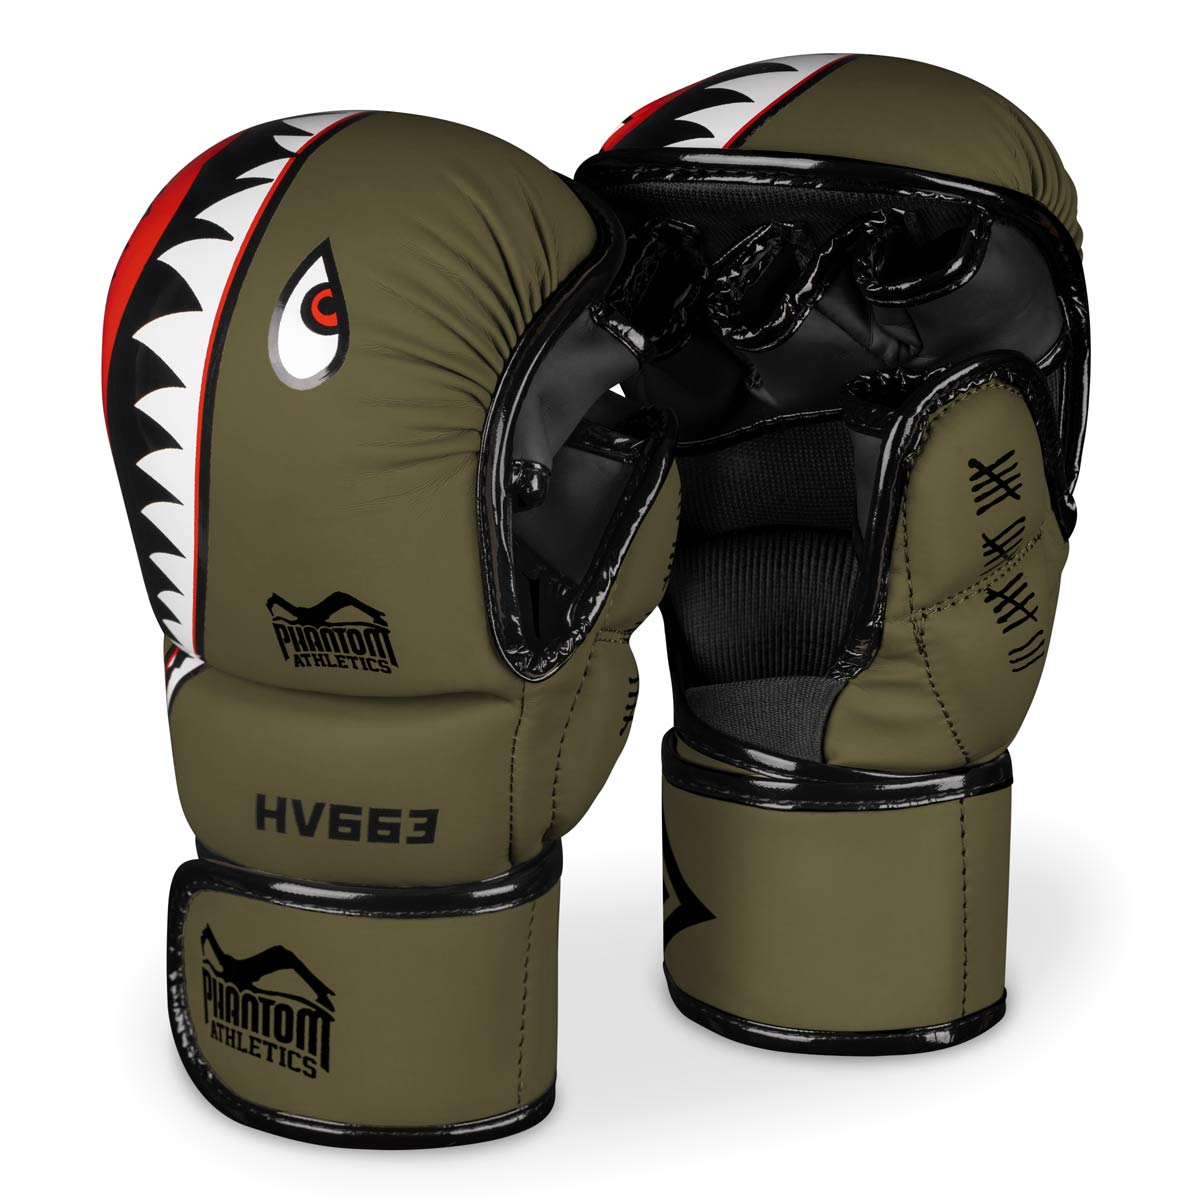 The Phantom MMA sparring gloves FIGHT SQUAD in army green